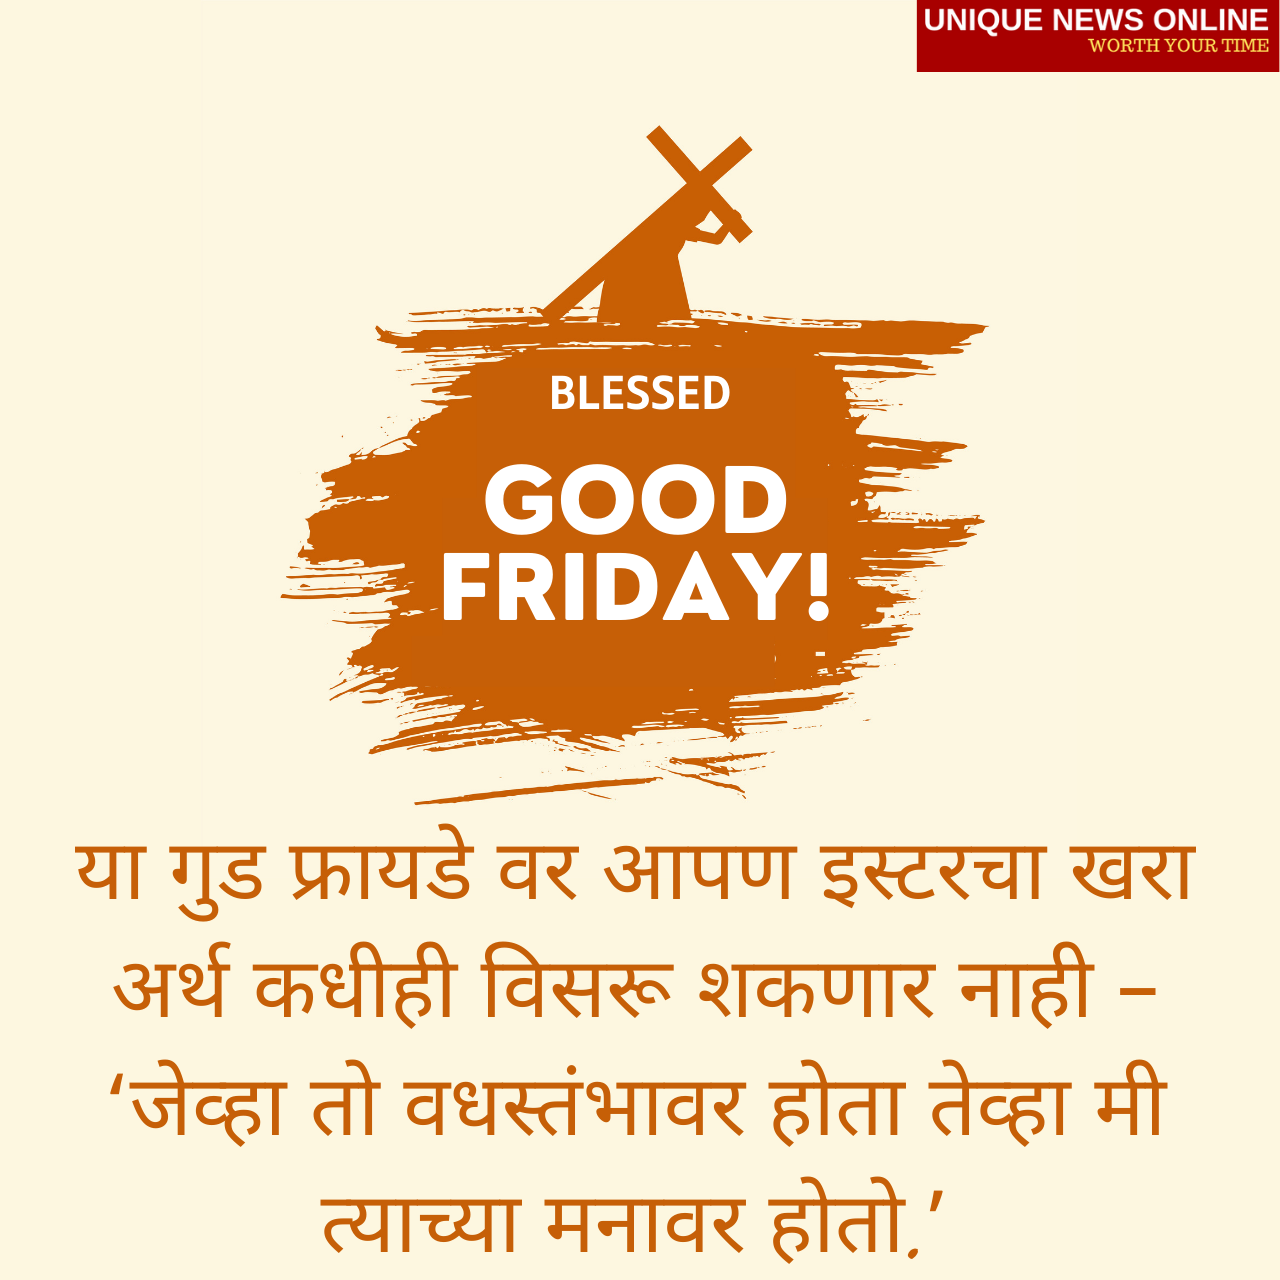 Happy Good Friday 2021 Wishes in Marathi, Greetings, Quotes, Messages, and Images to Share